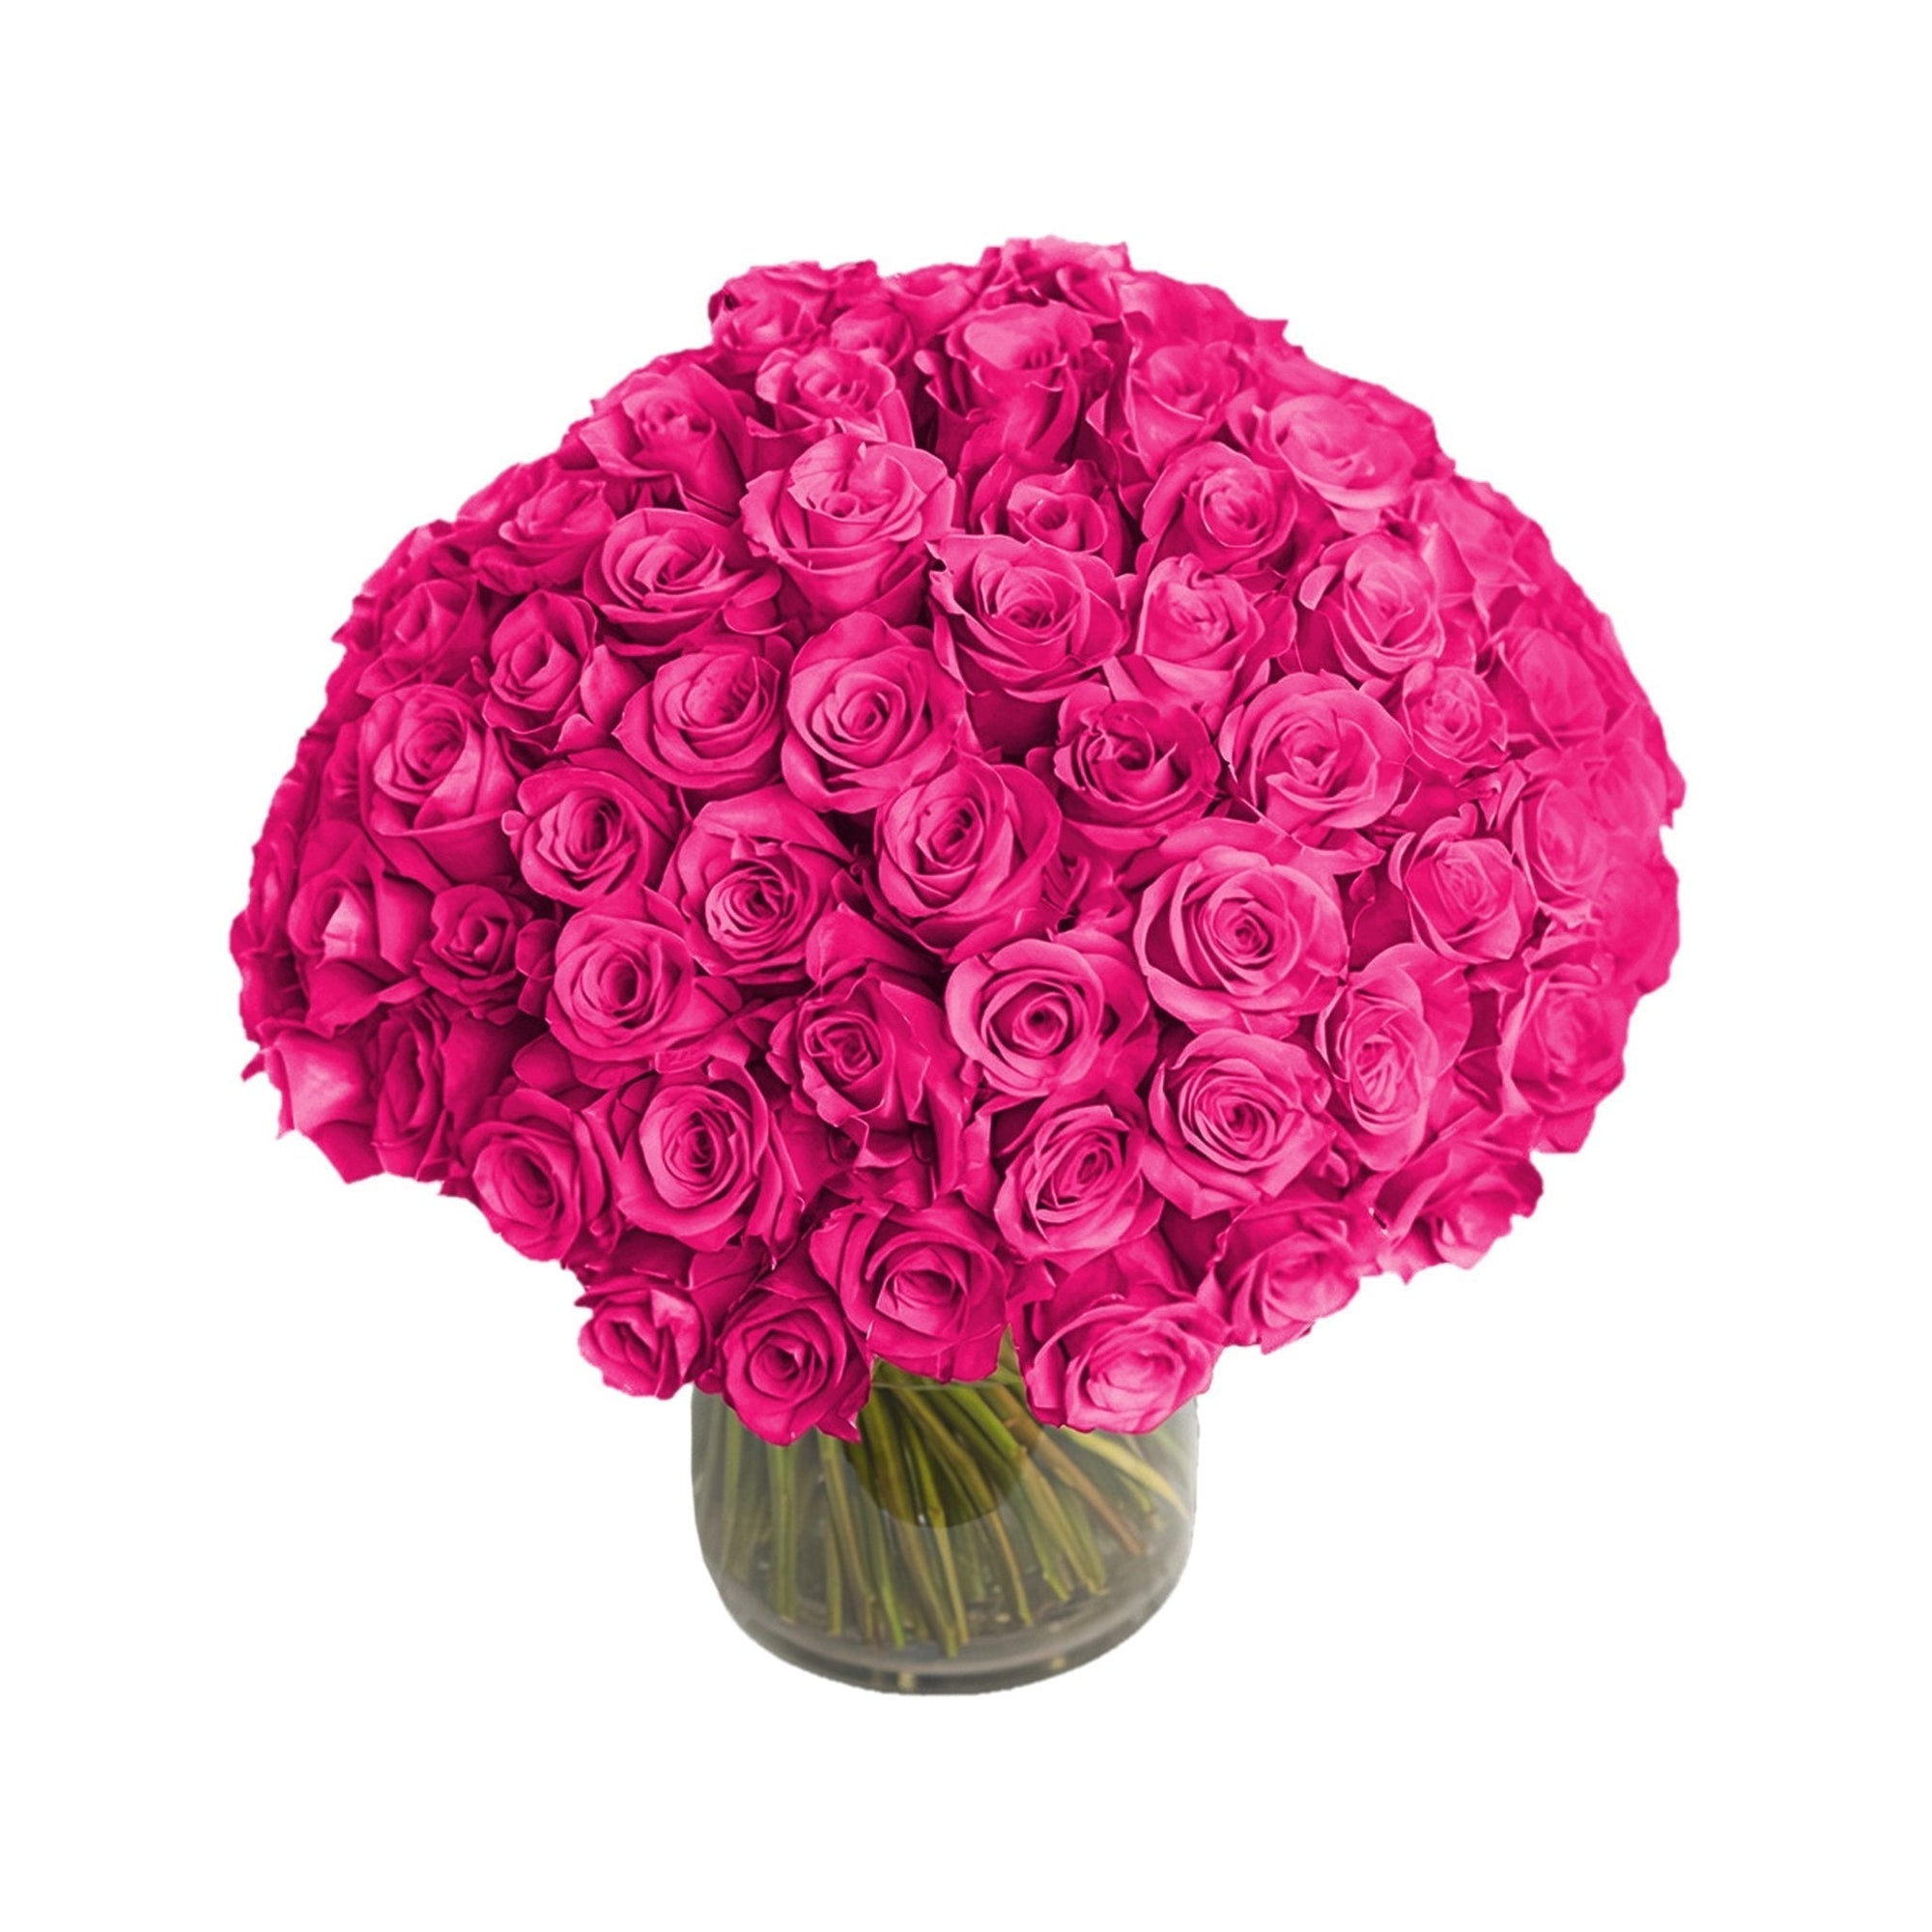 Queens Flower Delivery - Fresh Roses in a Vase | 100 Hot Pink Roses